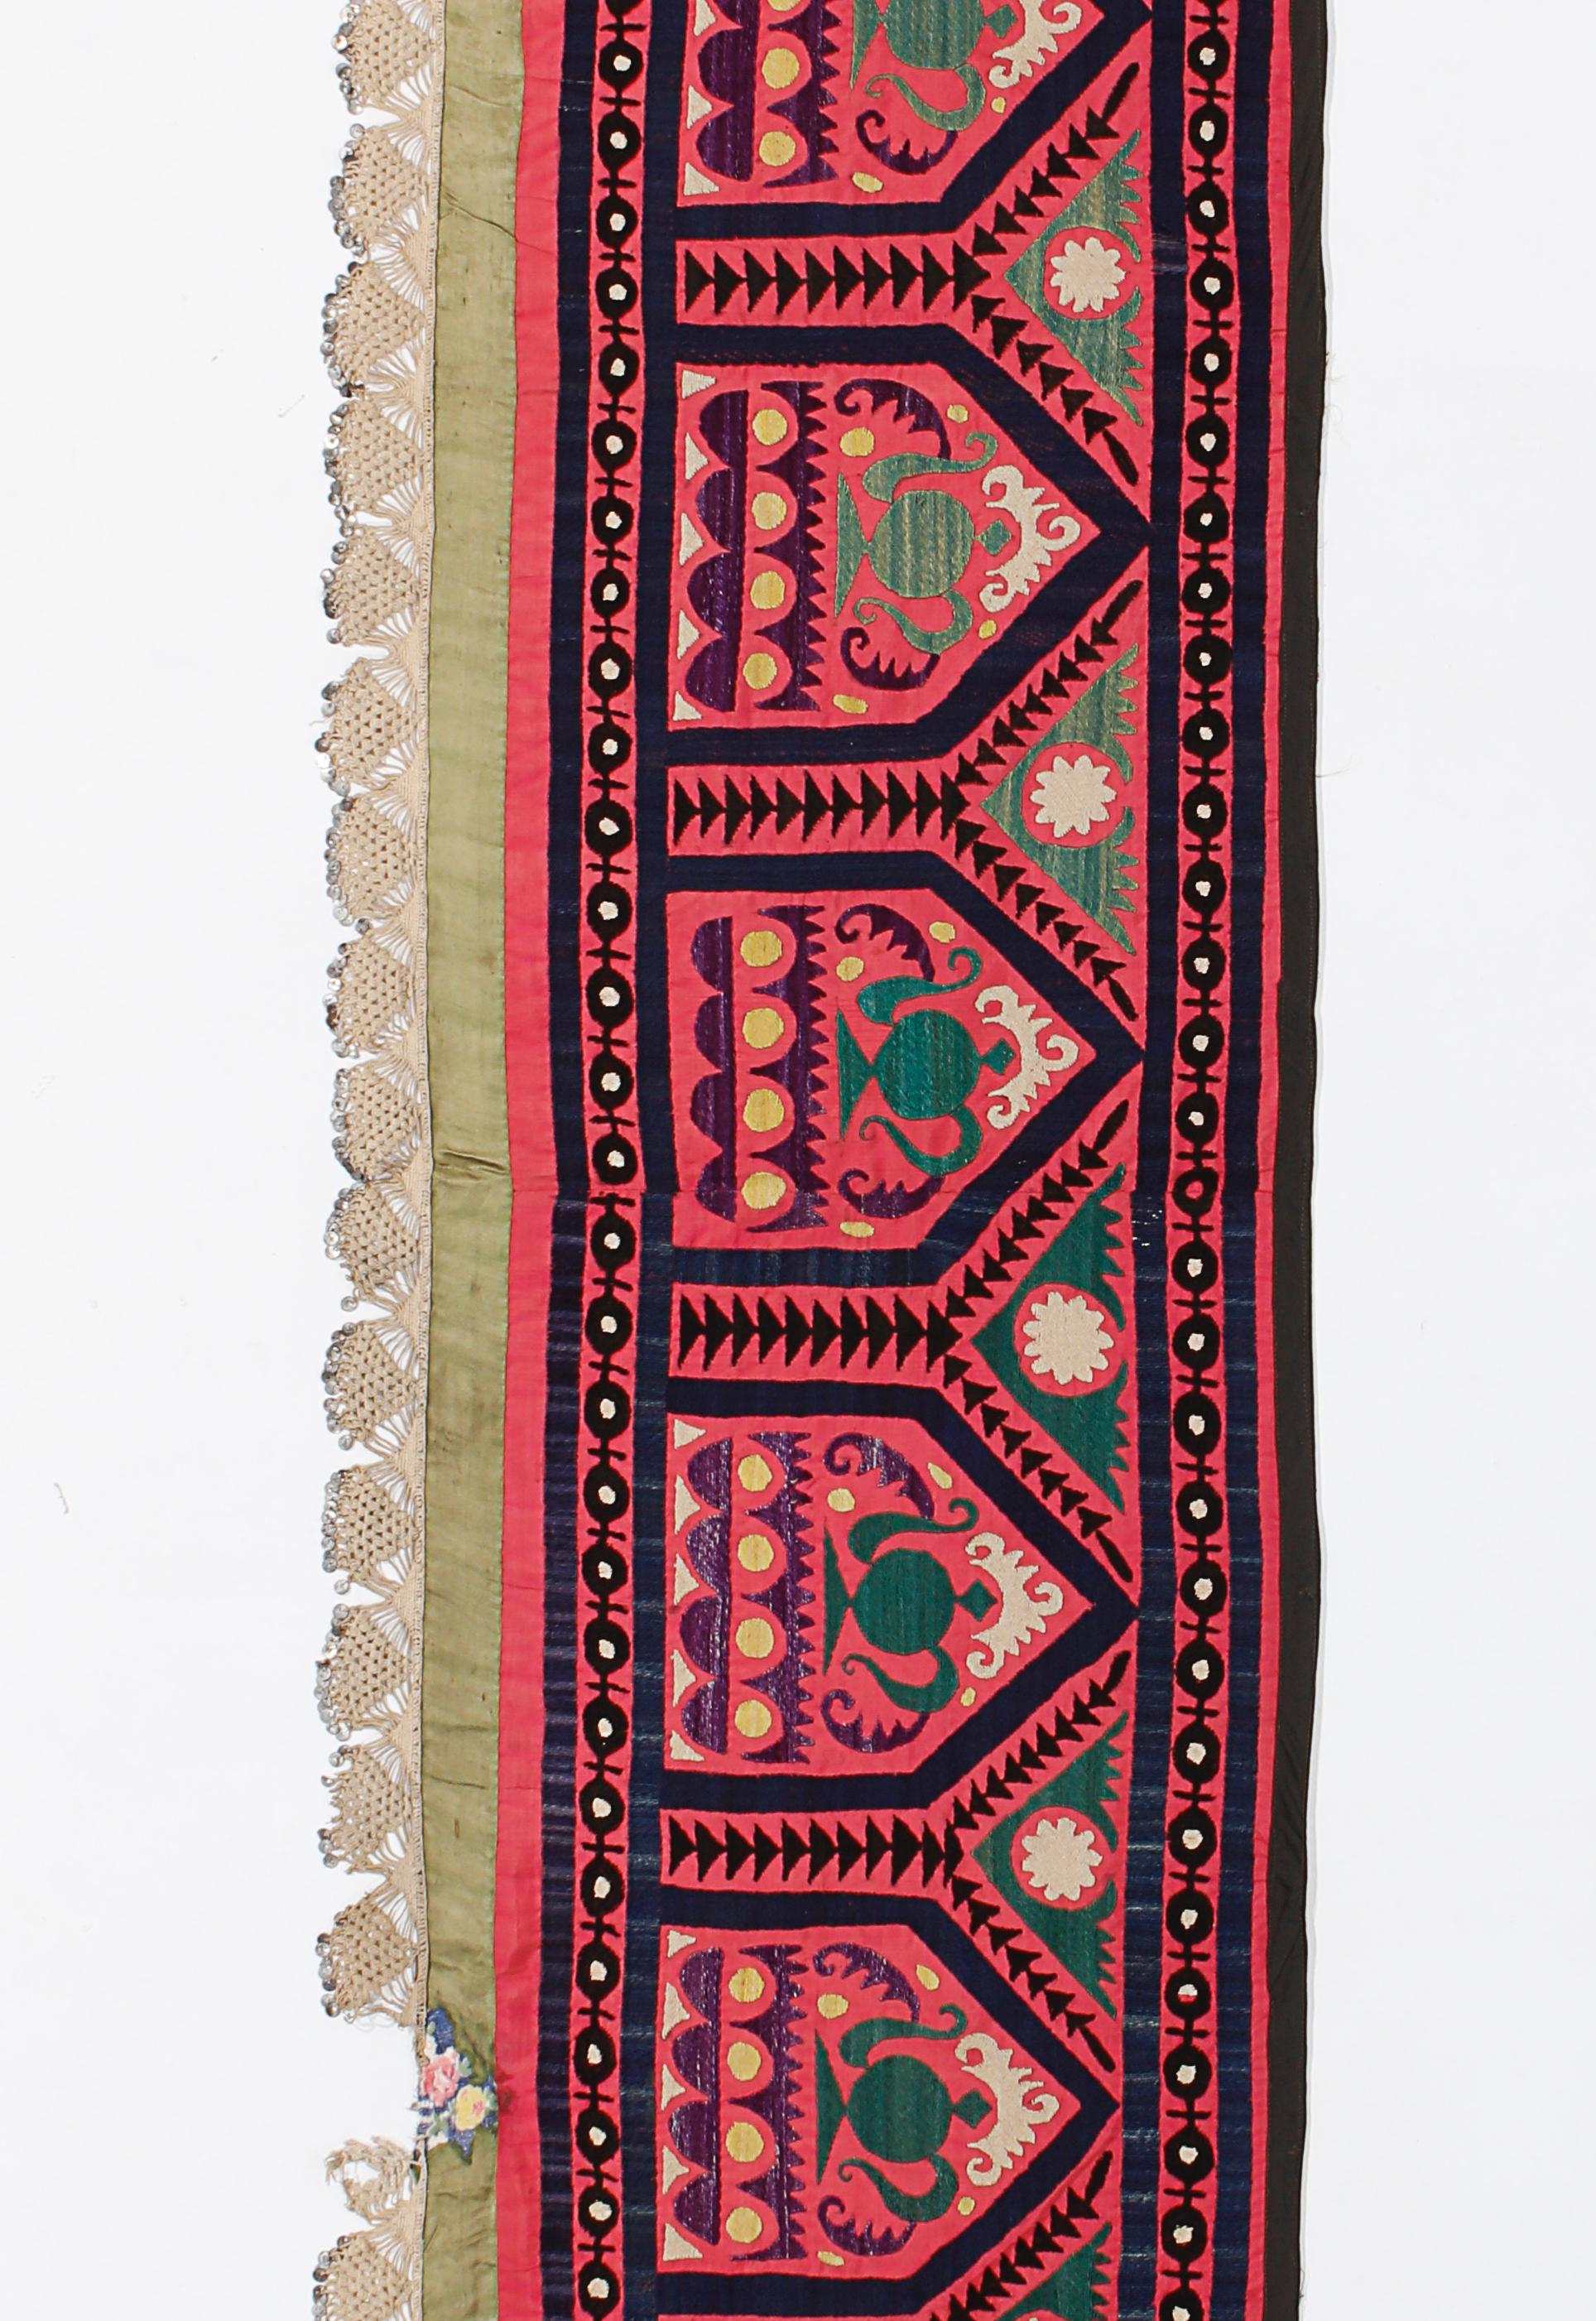 1.7x12.2 Ft Uzbek Suzani Wall Hanging, Embroidered Silk & Cotton Table Runner In Good Condition For Sale In Philadelphia, PA